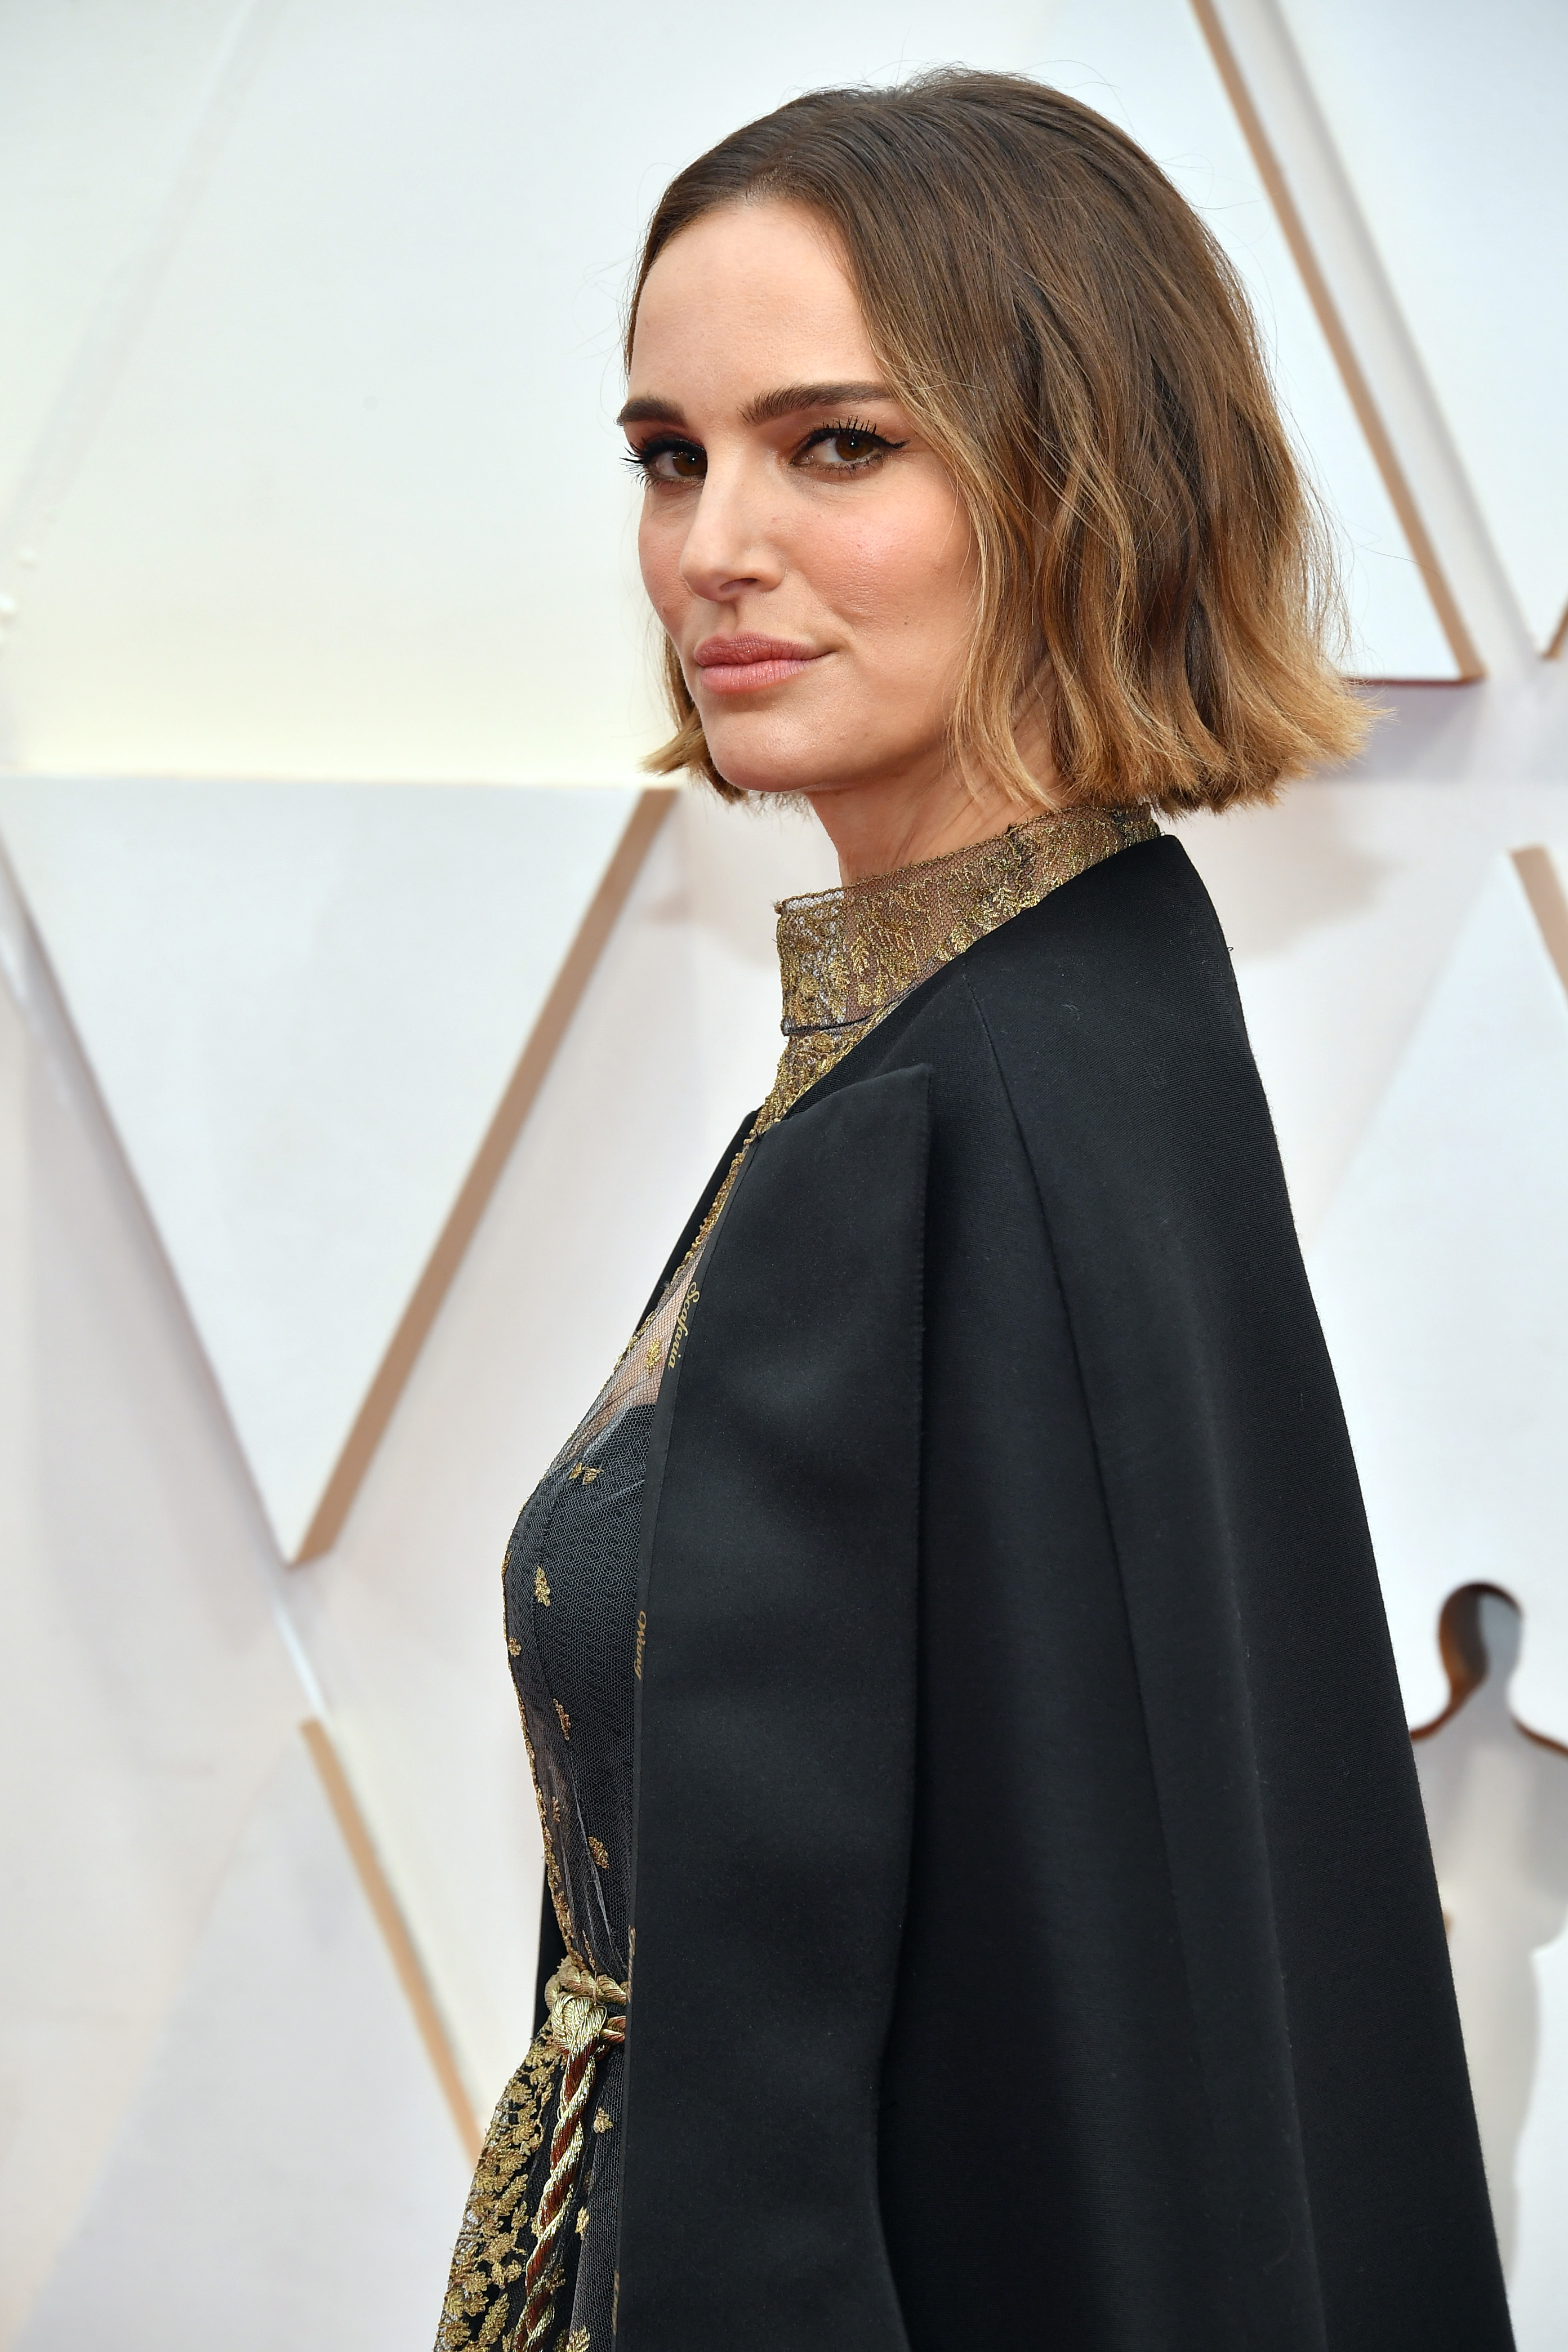 Natalie Portman attends the 92nd Annual Academy Awards in Hollywood, California, on February 9, 2020. | Source: Getty Images